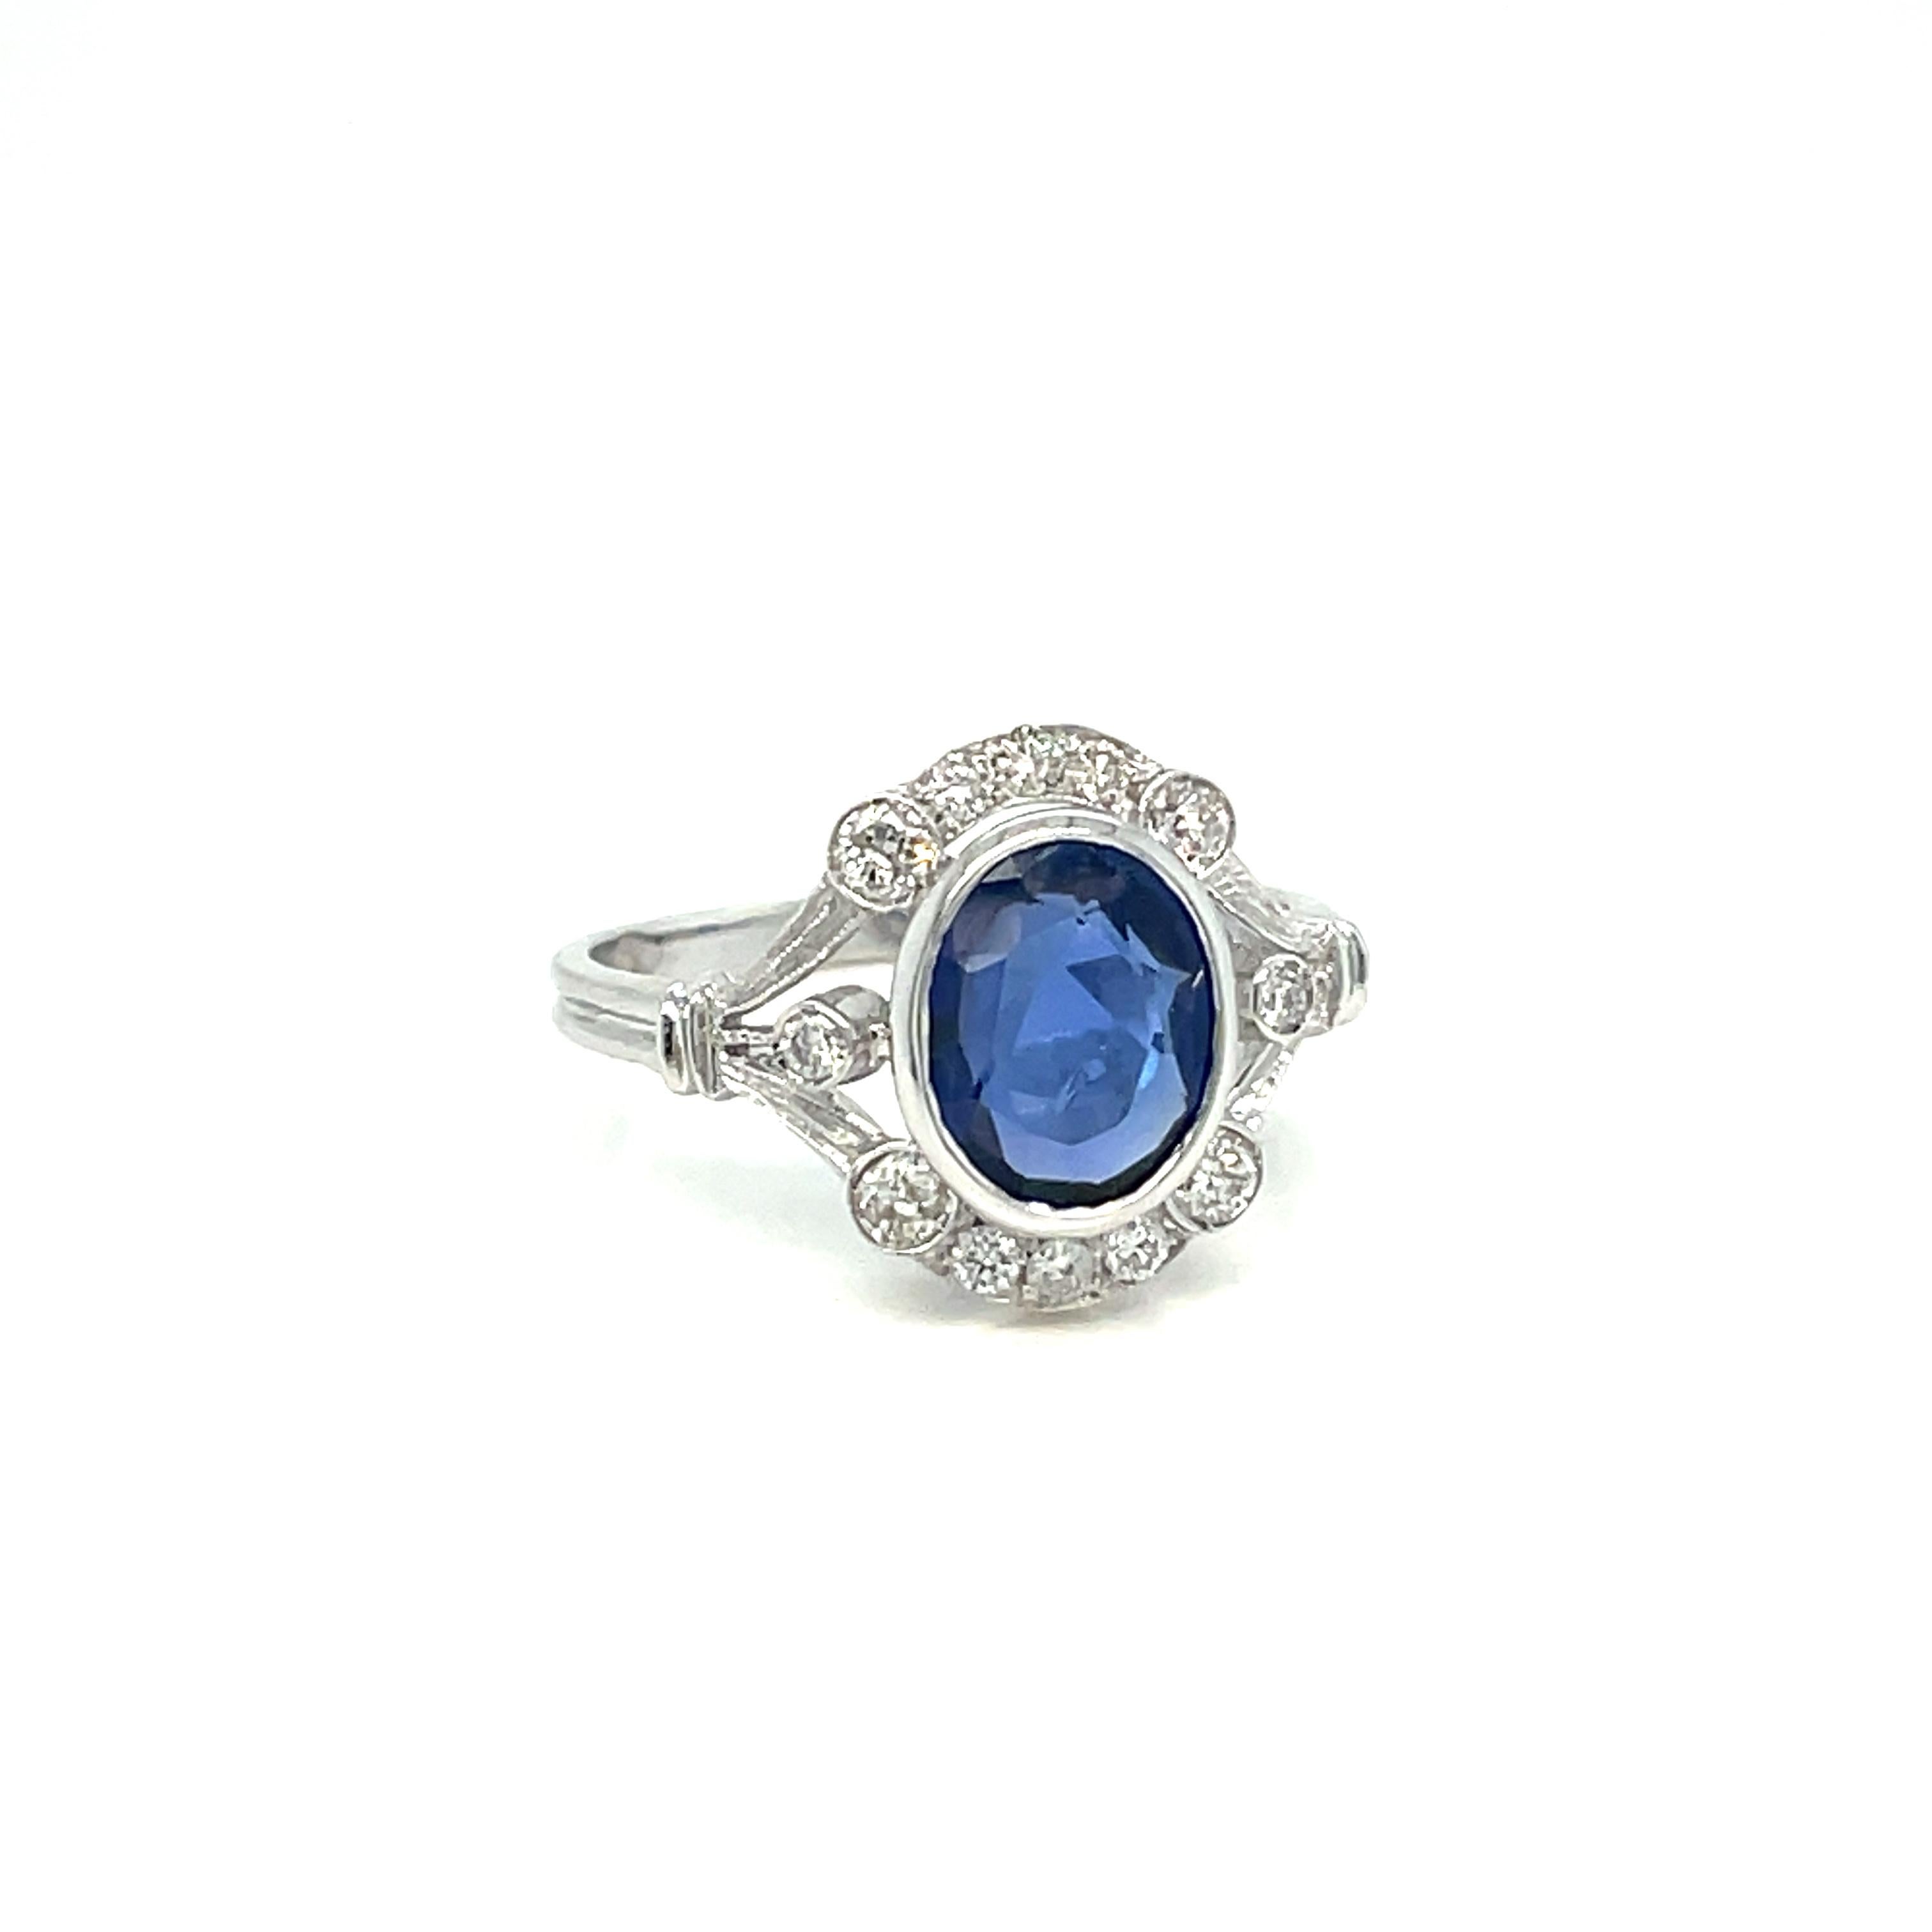 This beautiful Sapphire and Diamond Art Deco ring is hand crafted in solid 18k white gold and engraved in typical Art Deco design with Millegrain decorated aplique. 
It is set with a pleasant Blue oval cut Natural Unheated Burma Sapphire weighing